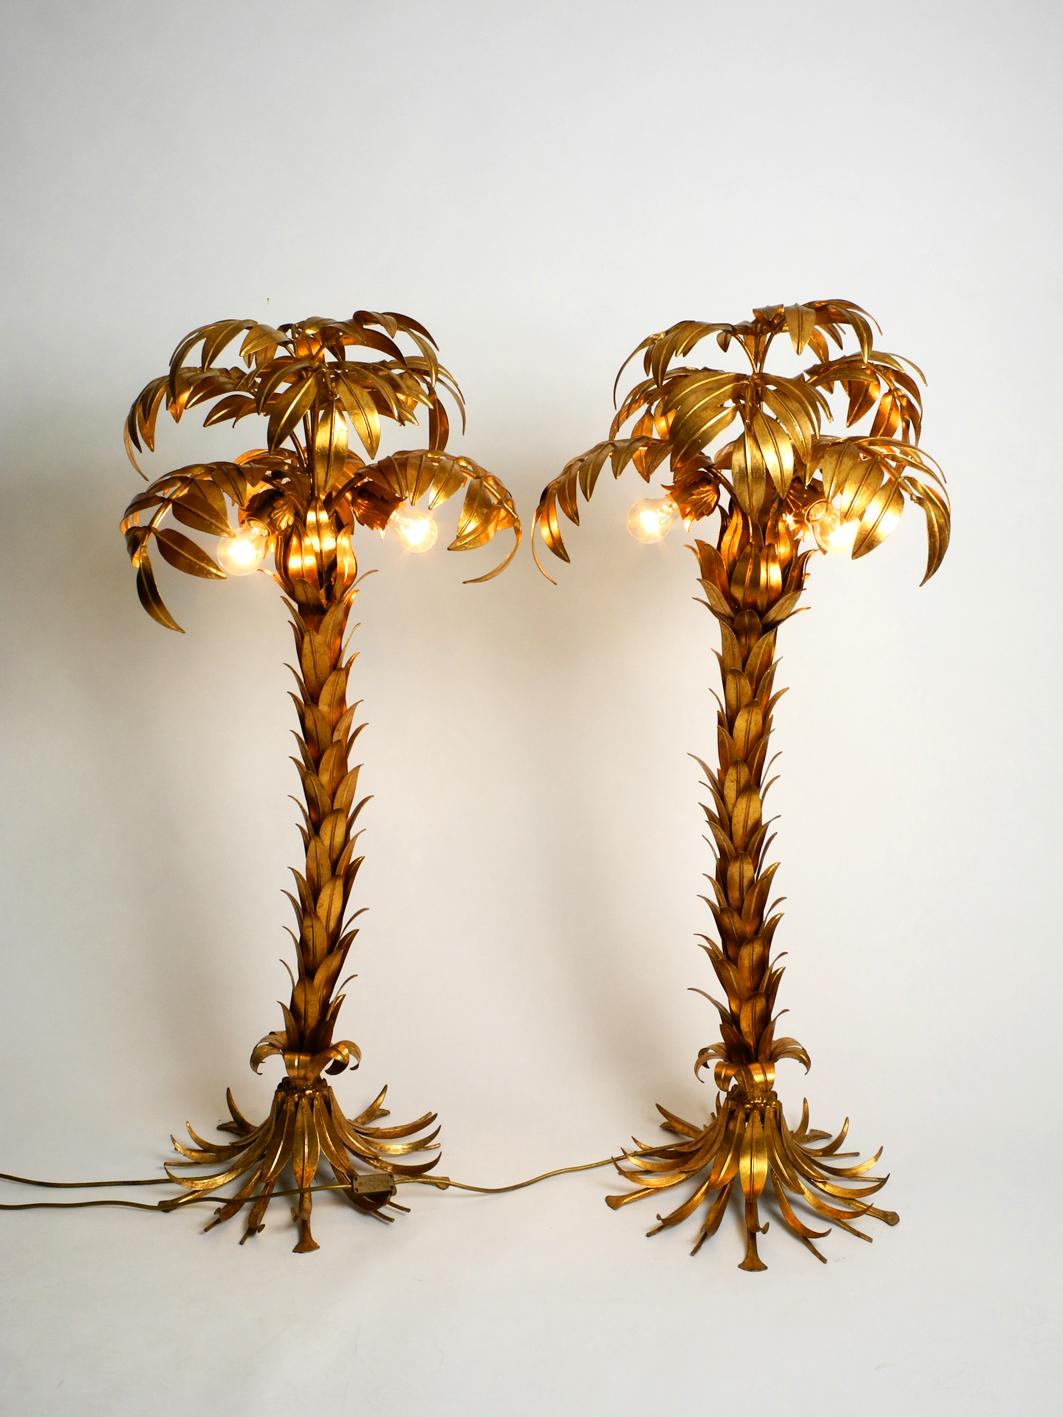 Paar of beautiful 1980s original brass palm floor lamp by Hans KöglaPair of beautiful 1970s original brass palm floor lamp by Hans Kögl. Great design for very pleasant light. Very high quality workmanship with many nice details. Very good vintage